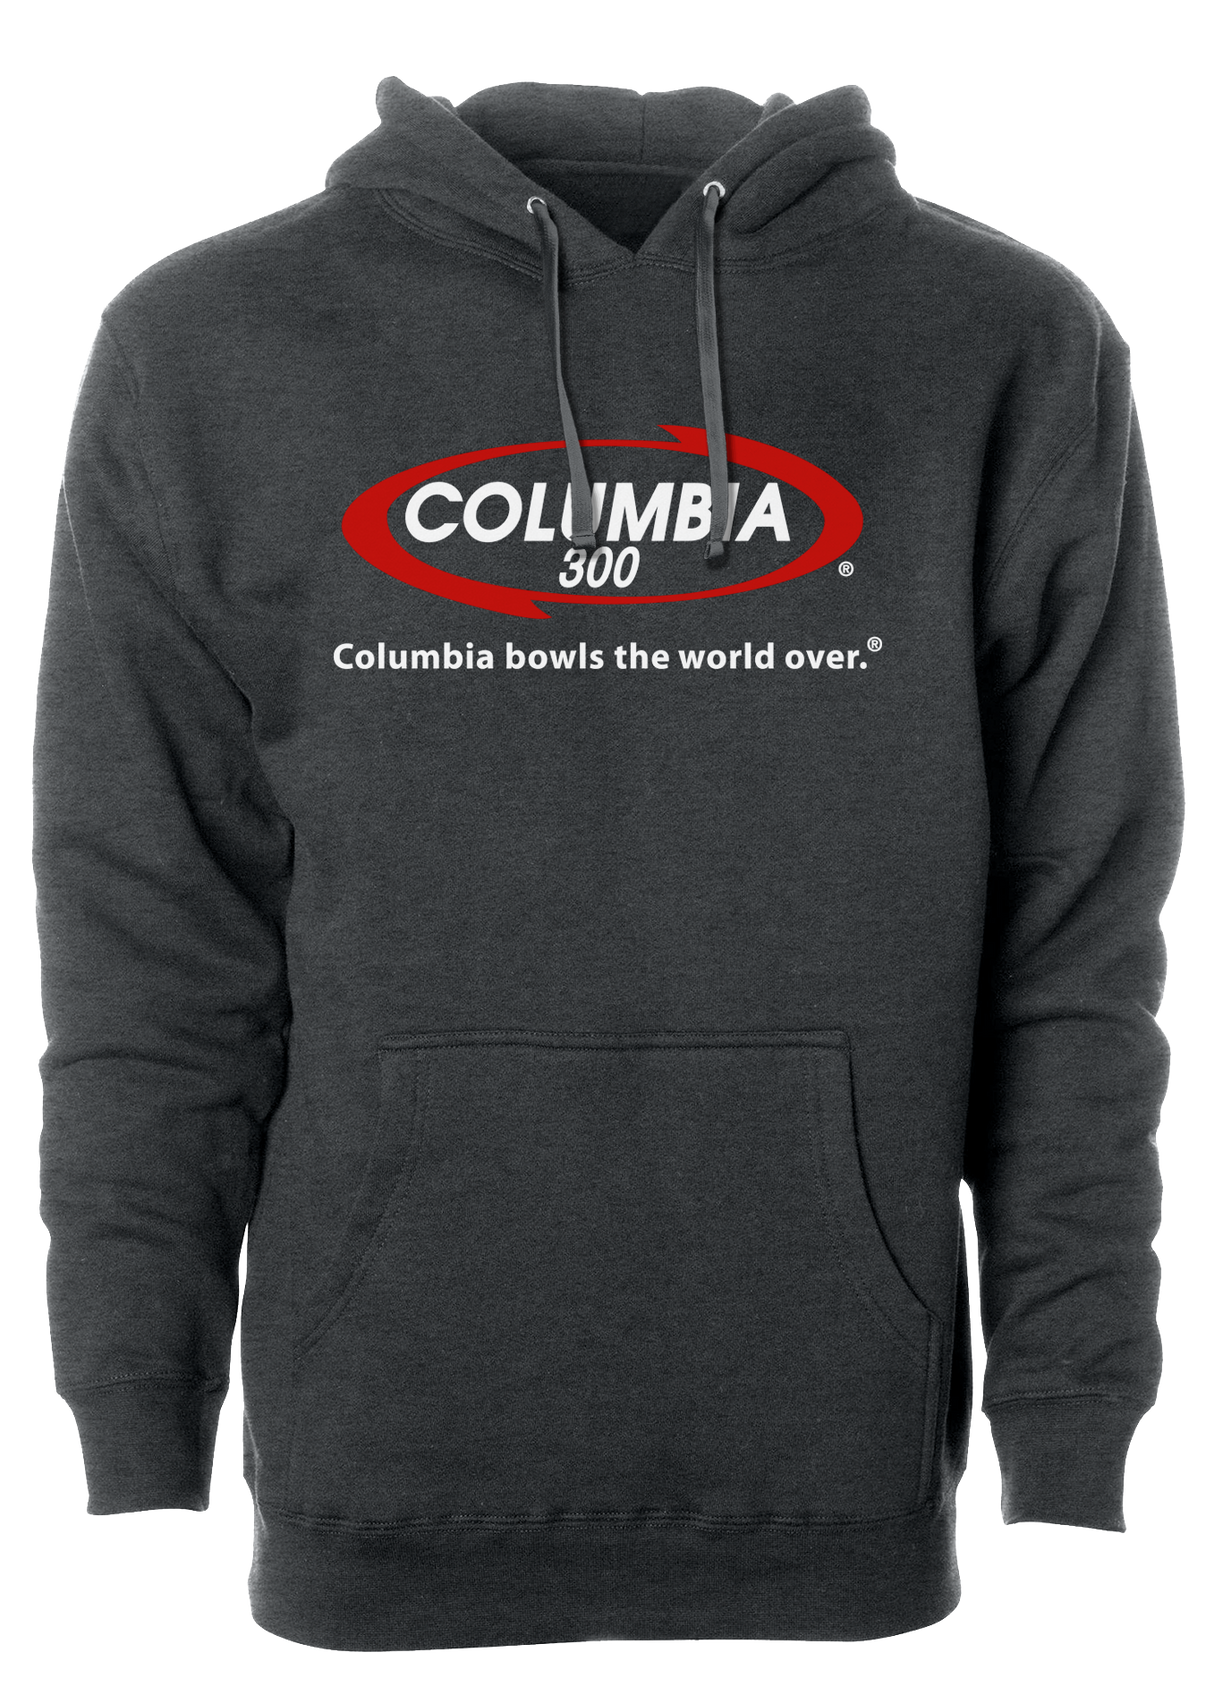 Keep warm in this stylish Columbia 300 - Bowls The World Over - design hooded sweatshirt. #Columbia300 #BowlsTheWorldOver  Front pouch pocket Midweight Hoodie/Hooded Sweatshirt Bowling Gear Gift Discount Save Collection Ebay Amazon Cheap Value 